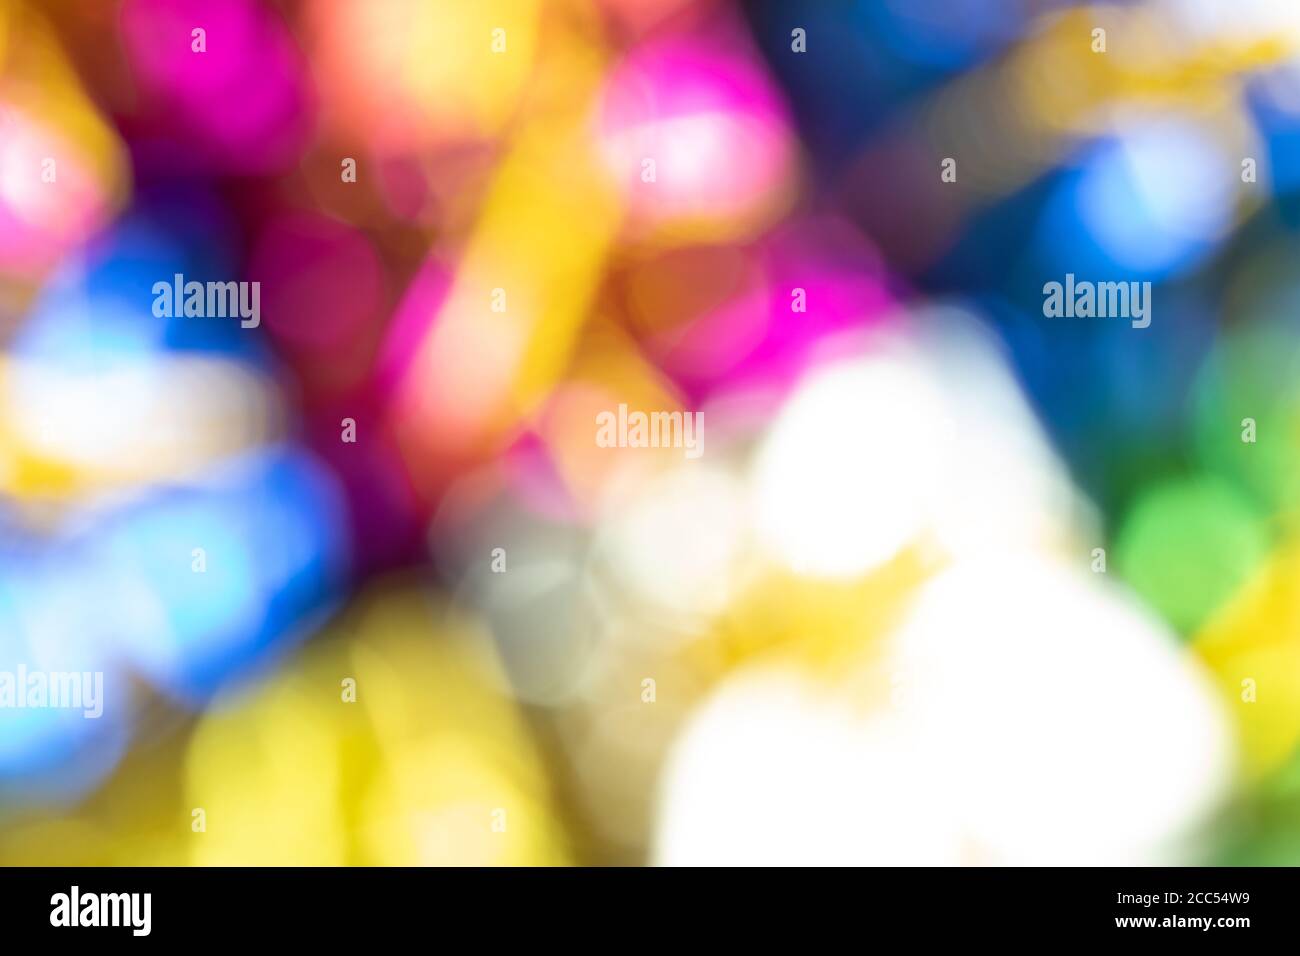 Blurry background with colorful presents gifts Stock Photo